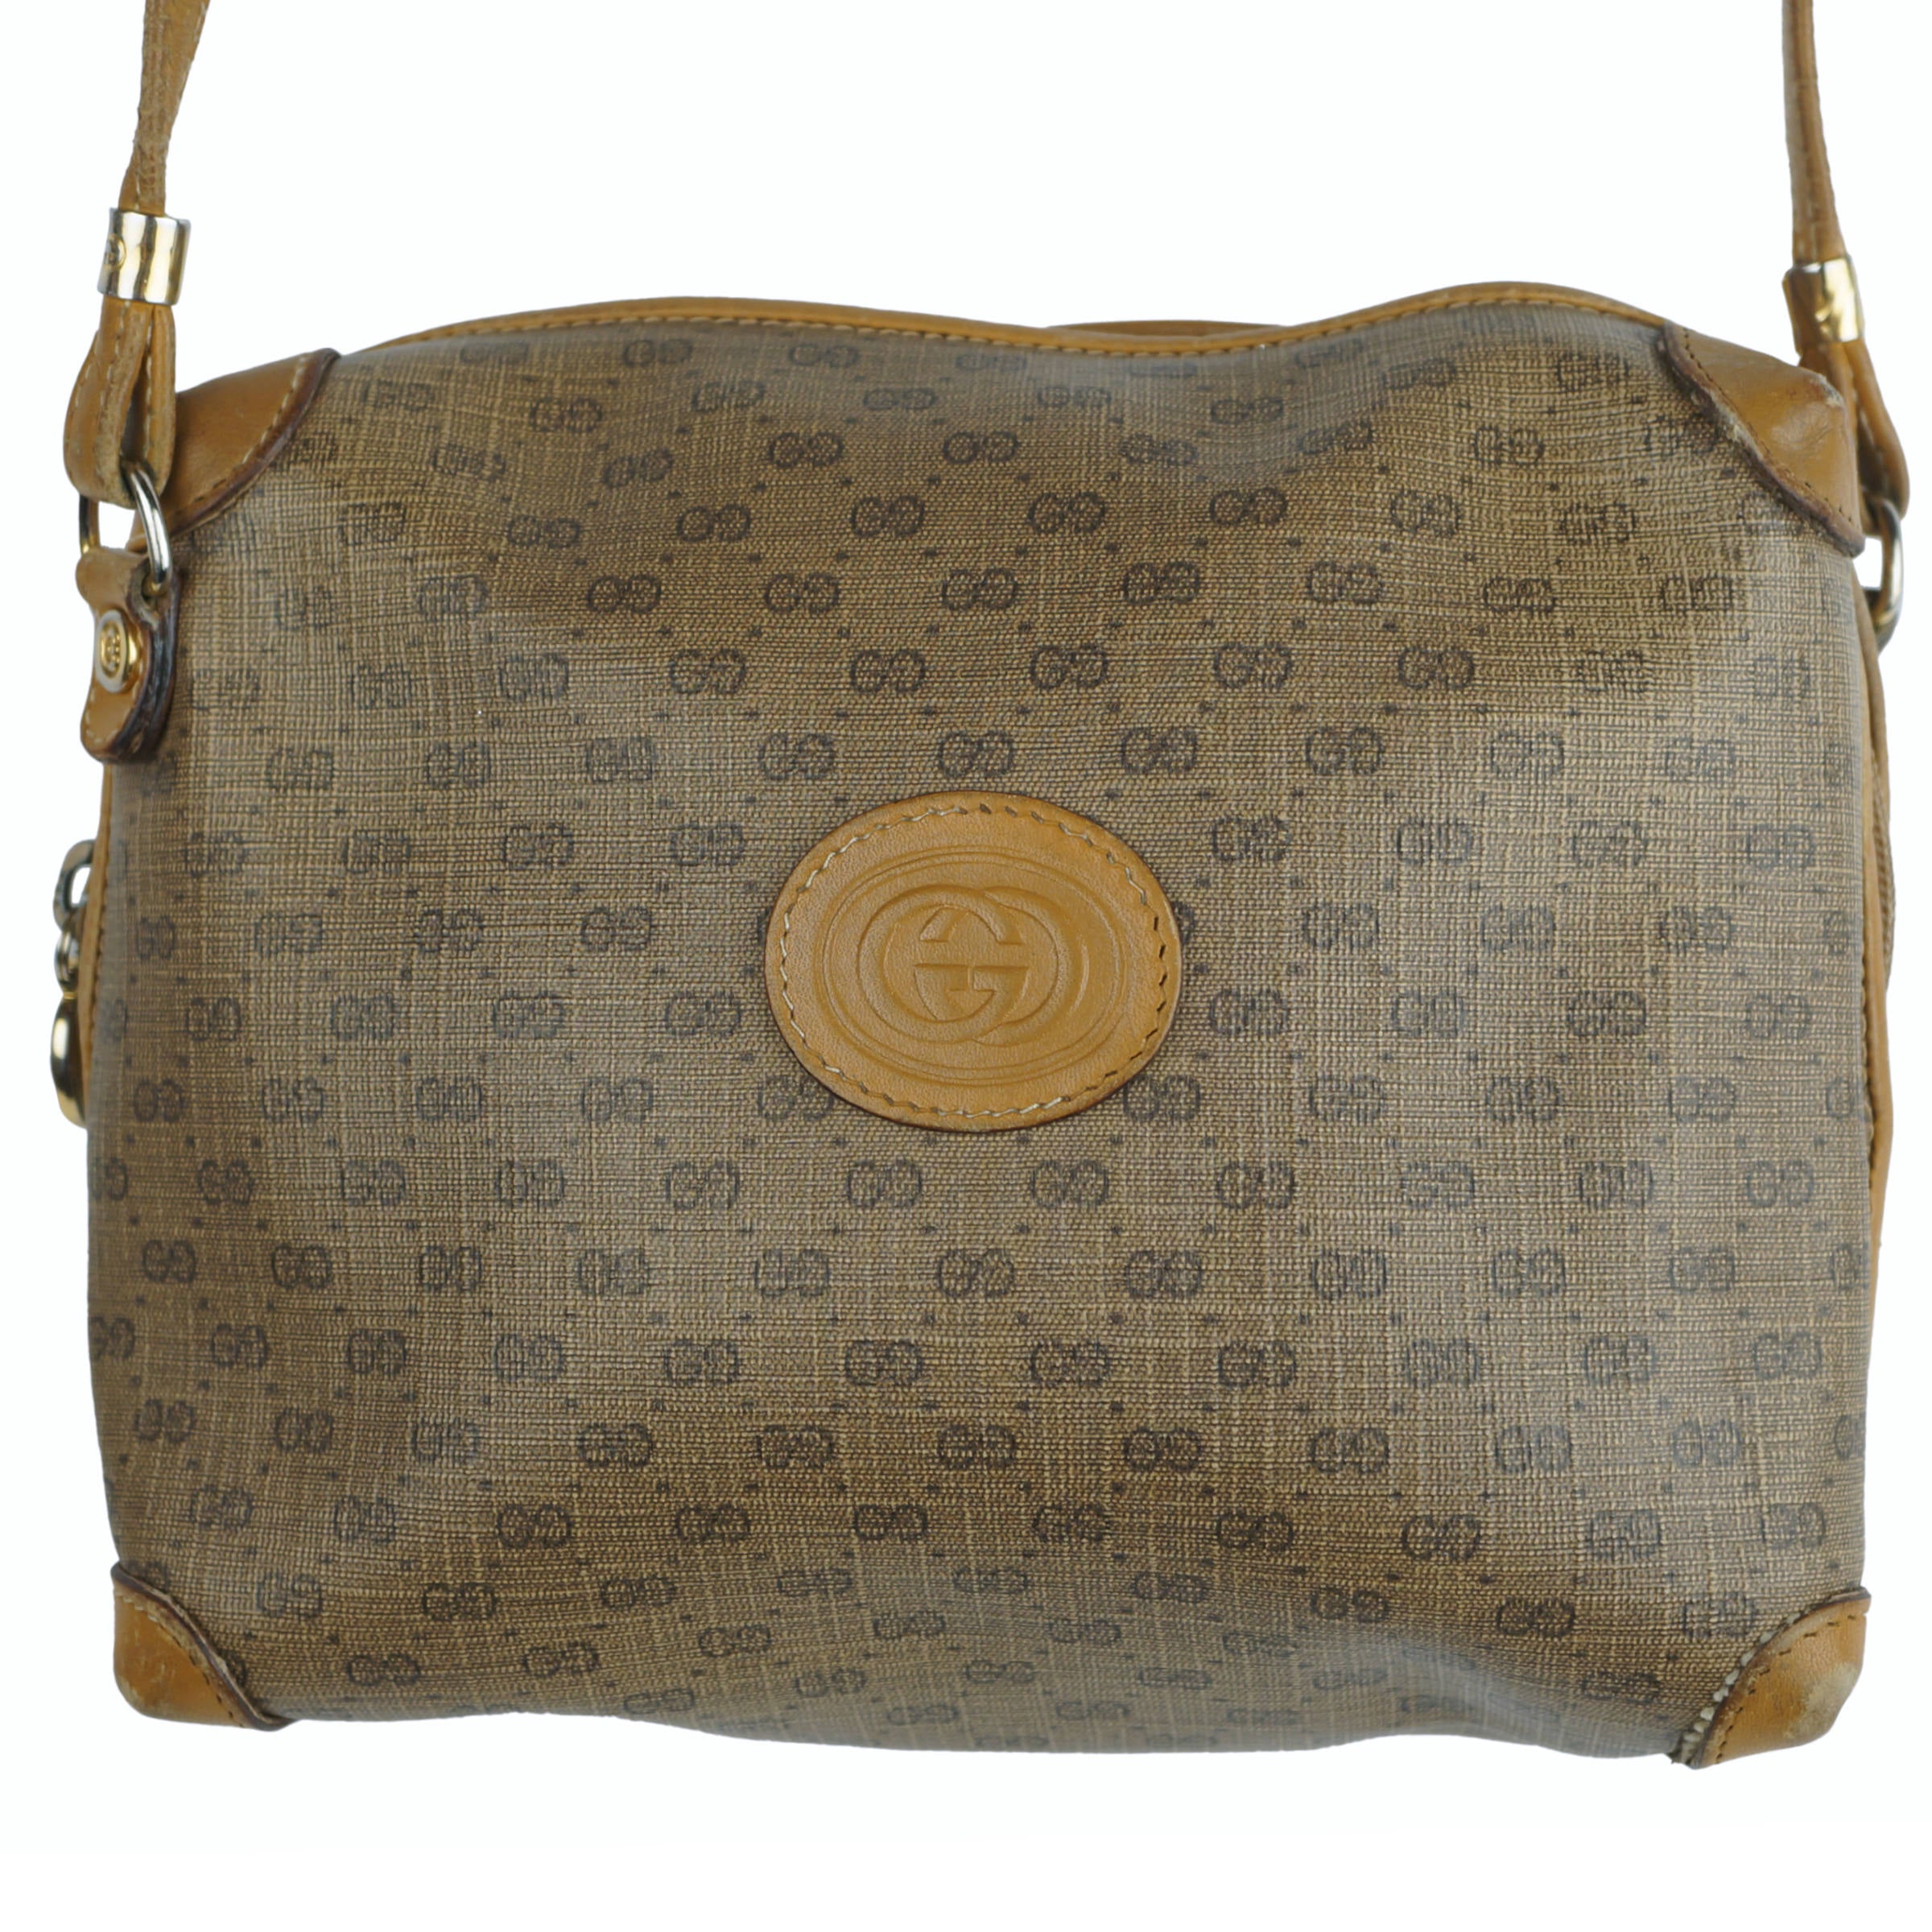 Gucci, Bags, Authentic Vintage Gucci Crossbody Bag